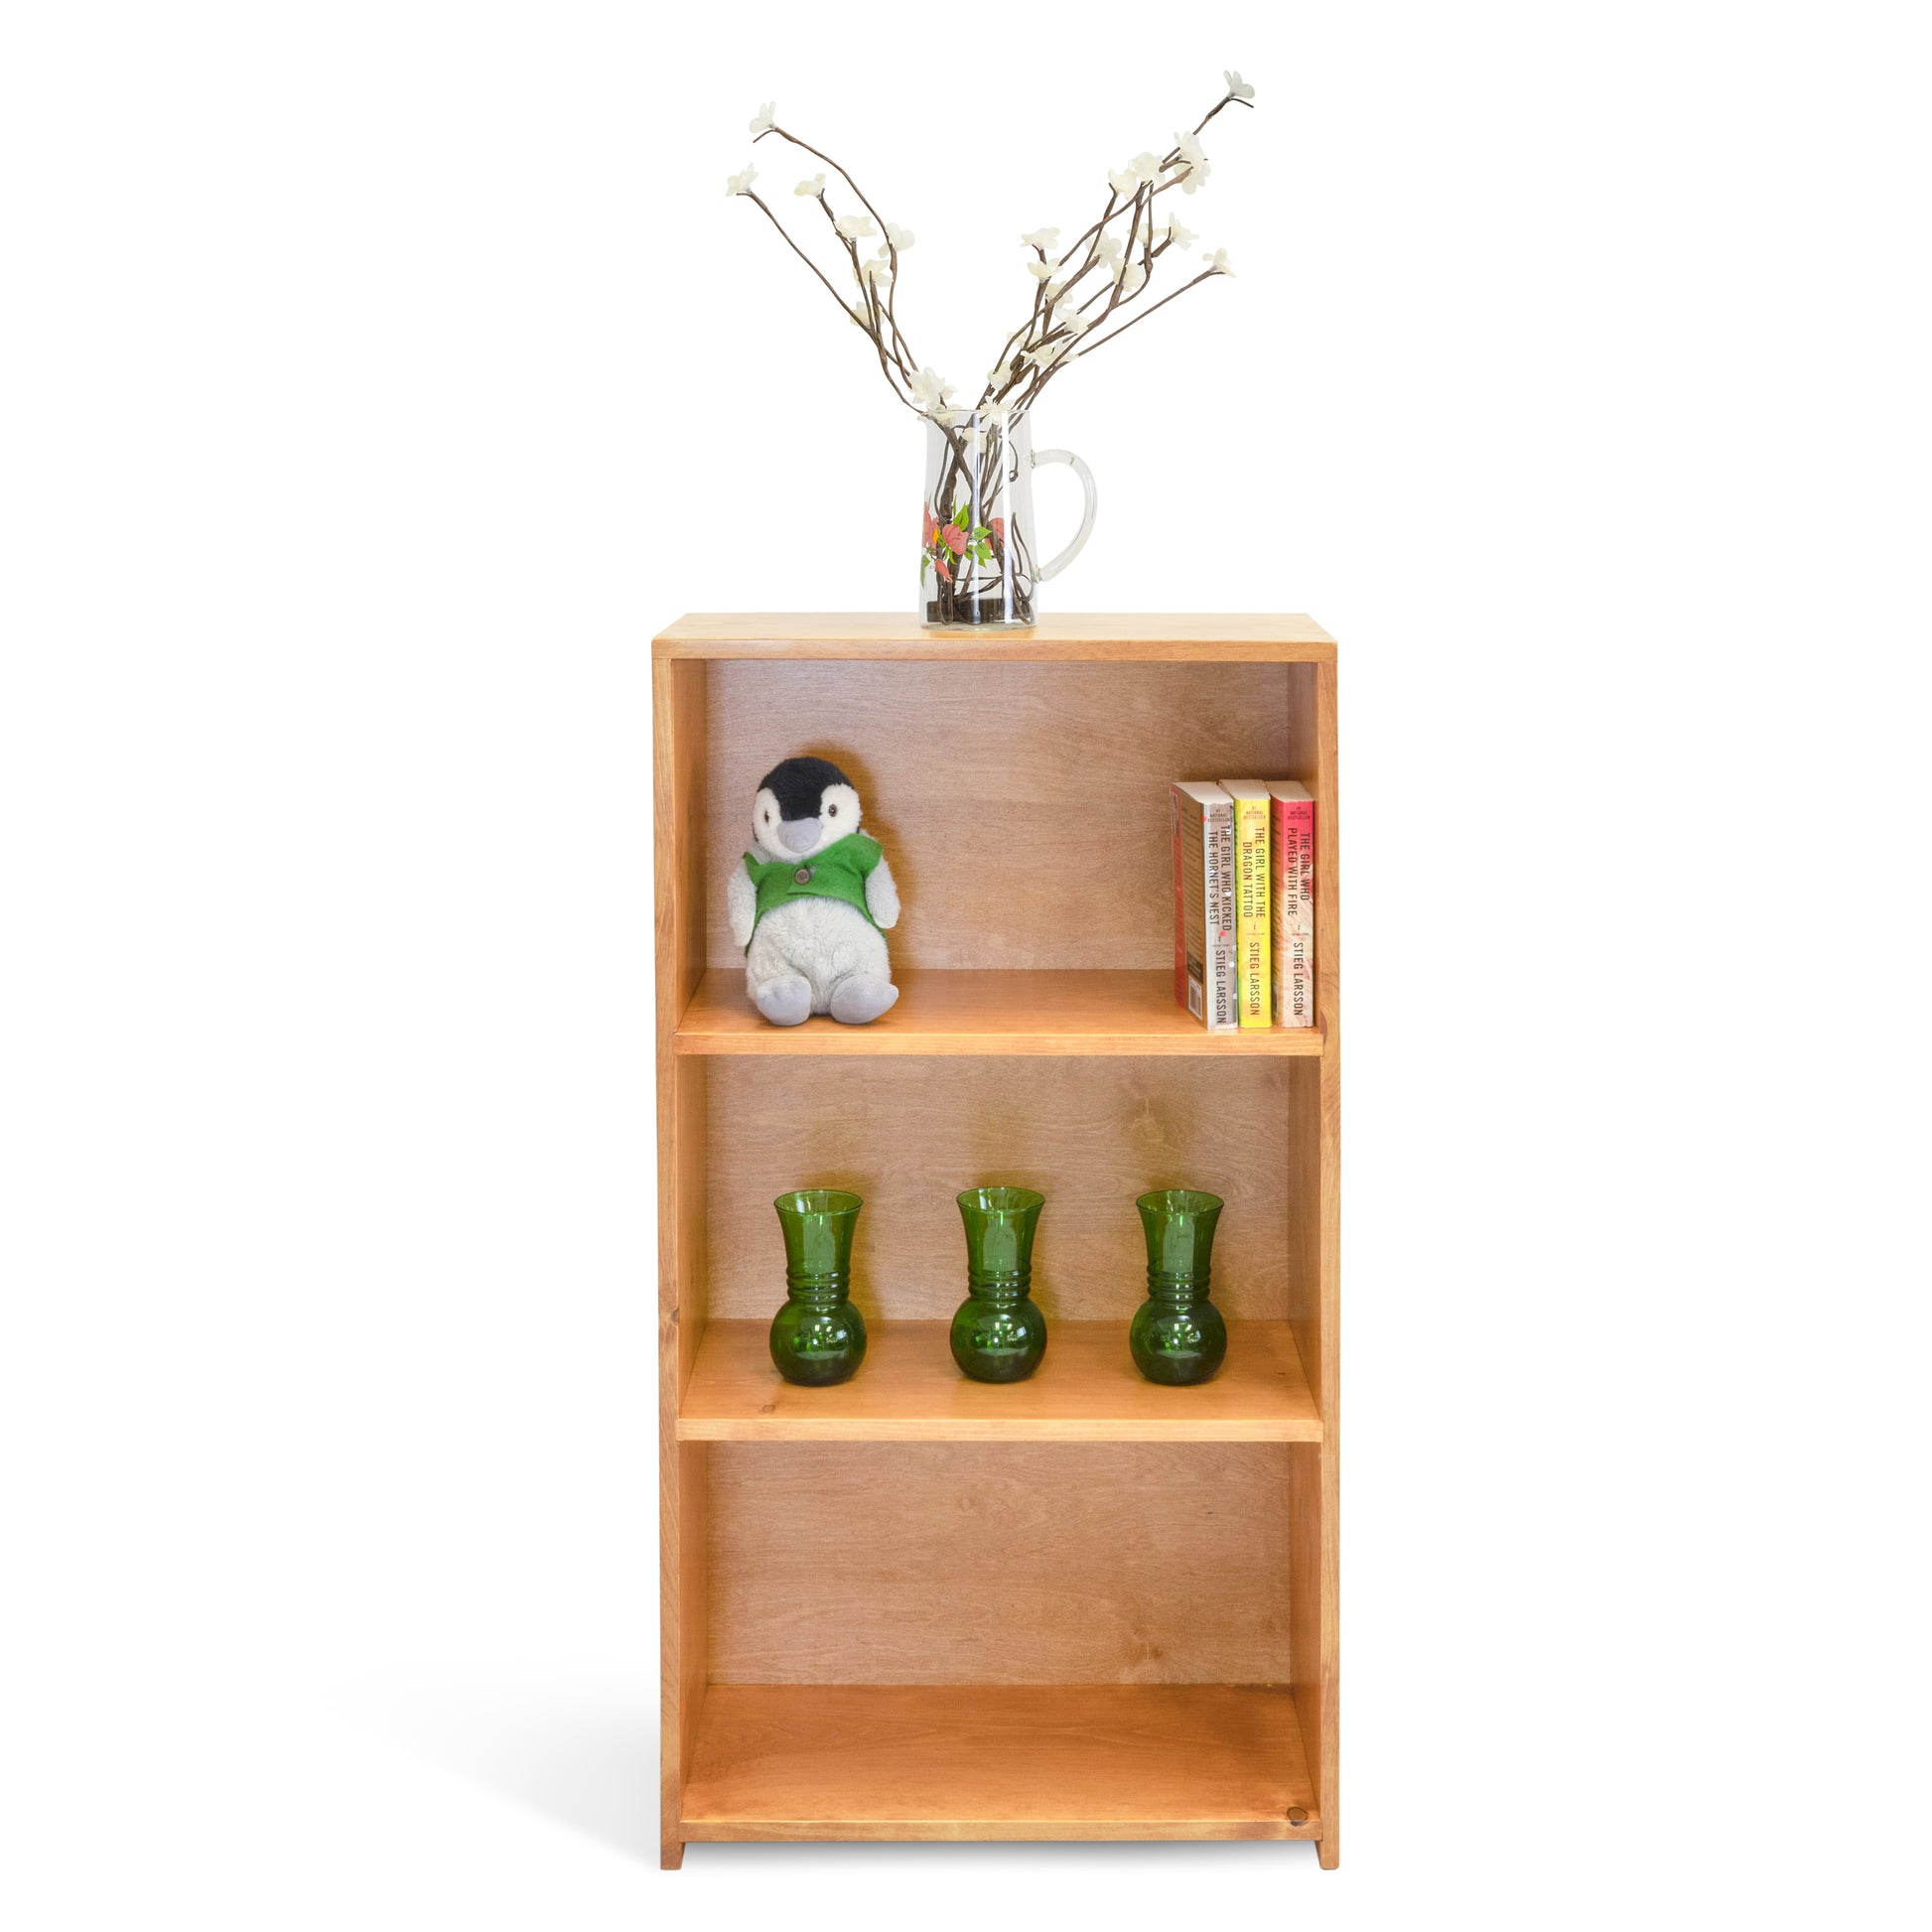 Evergreen bookcase with 11-1/4" depth in constructed from pine, shown in Golden Oak finish.